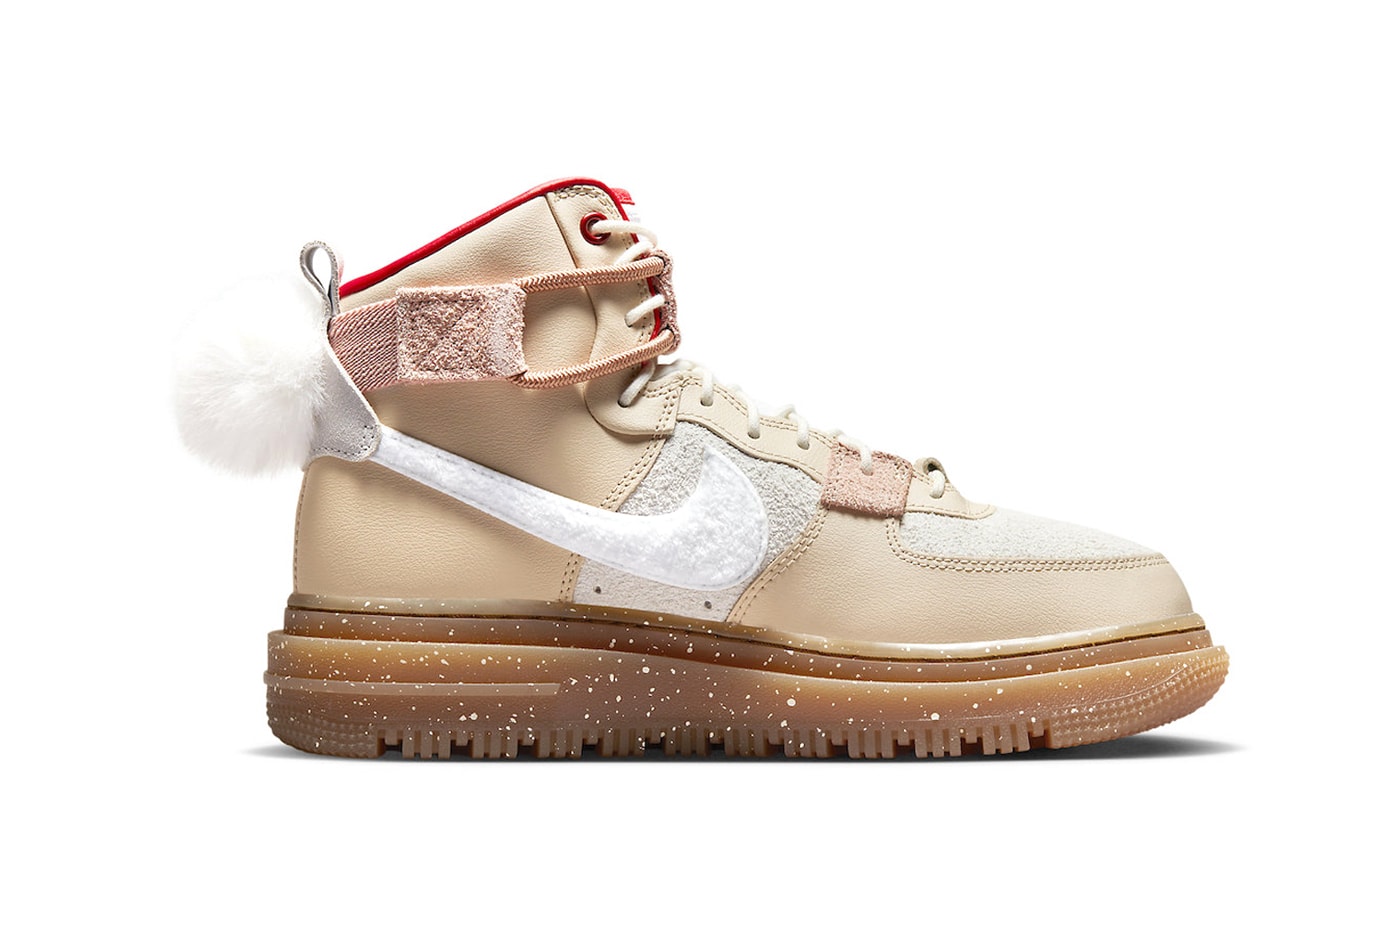 Nike air force 1 high utility 2 0 leap high suede leather white fuzzy chenille pom pom tan speckled red release info date price